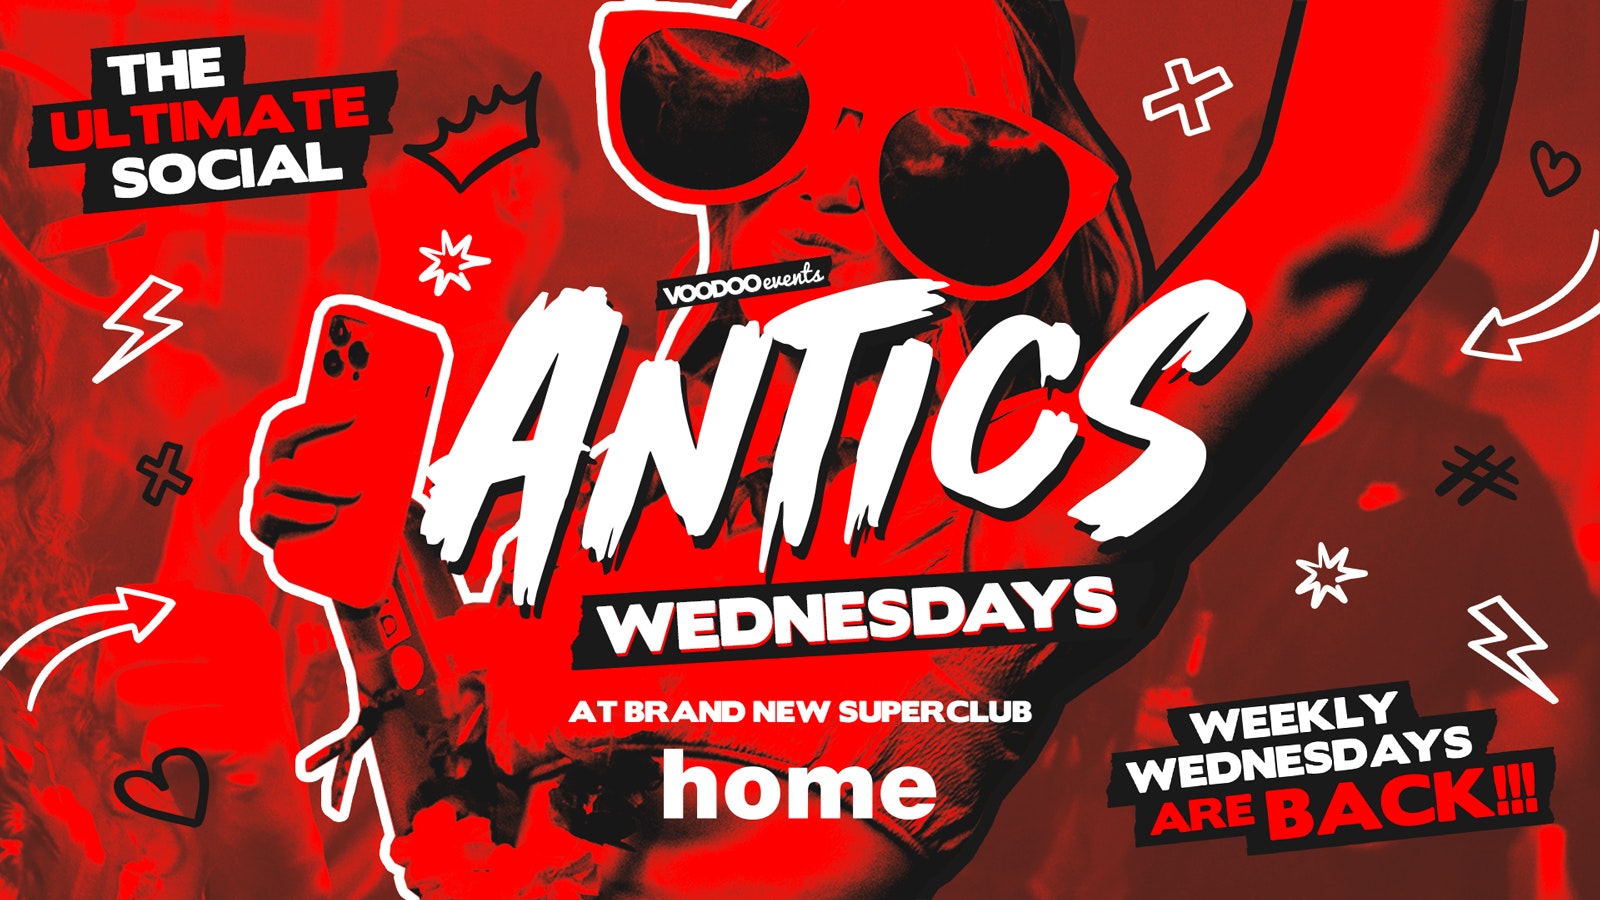 Antics @ THE BRAND NEW SUPER CLUB HOME – Wednesday 17th July